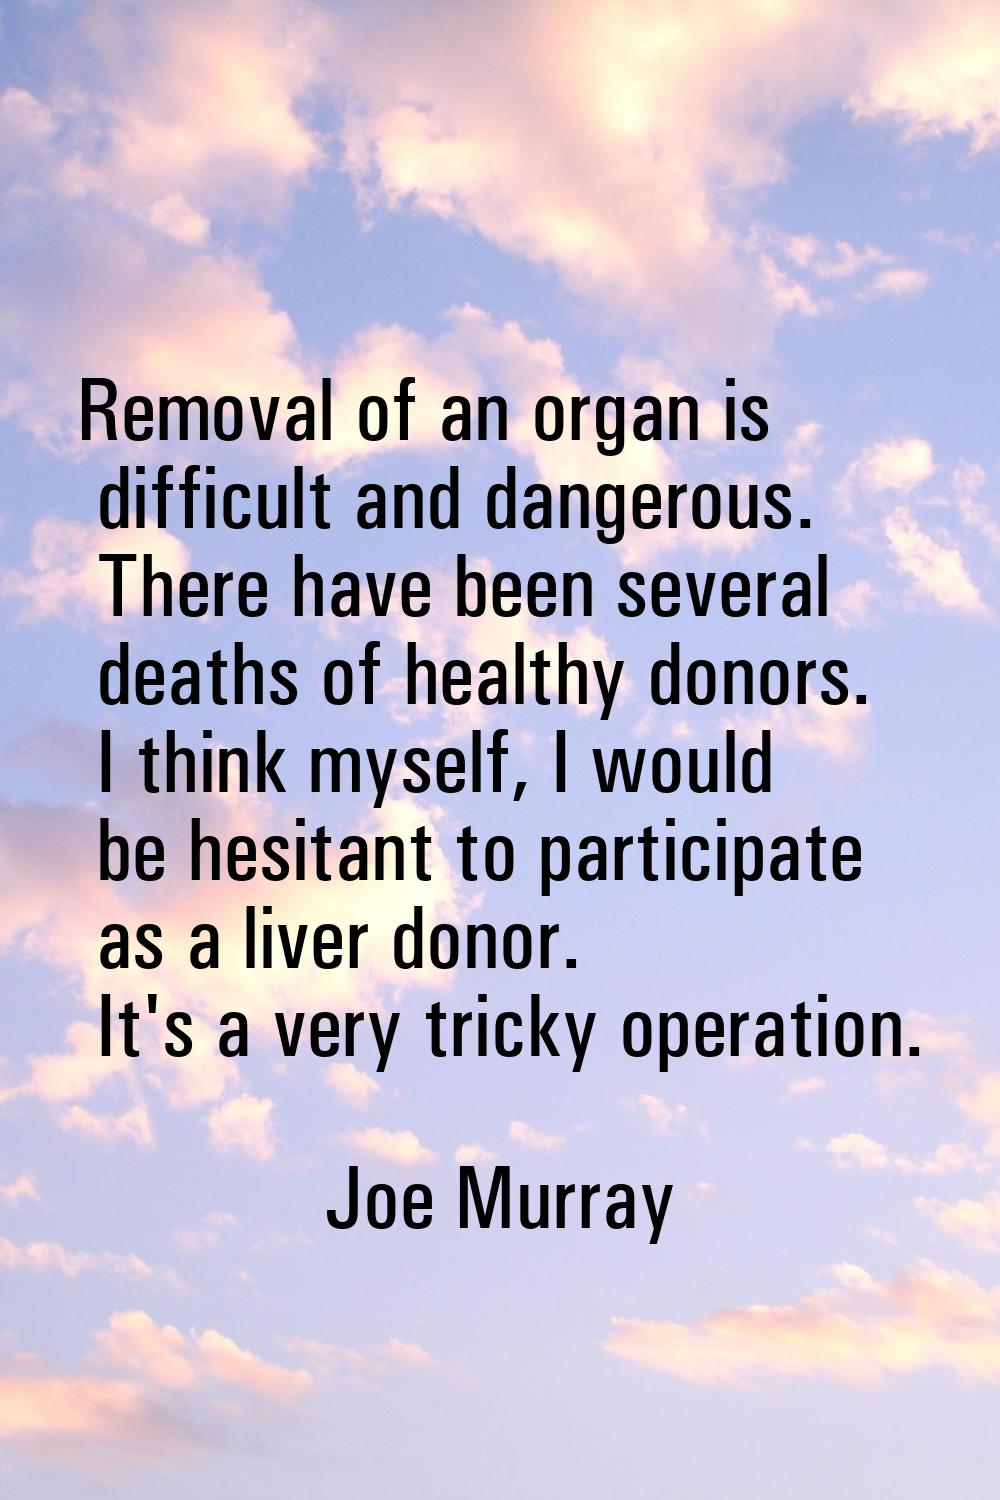 Removal of an organ is difficult and dangerous. There have been several deaths of healthy donors. I